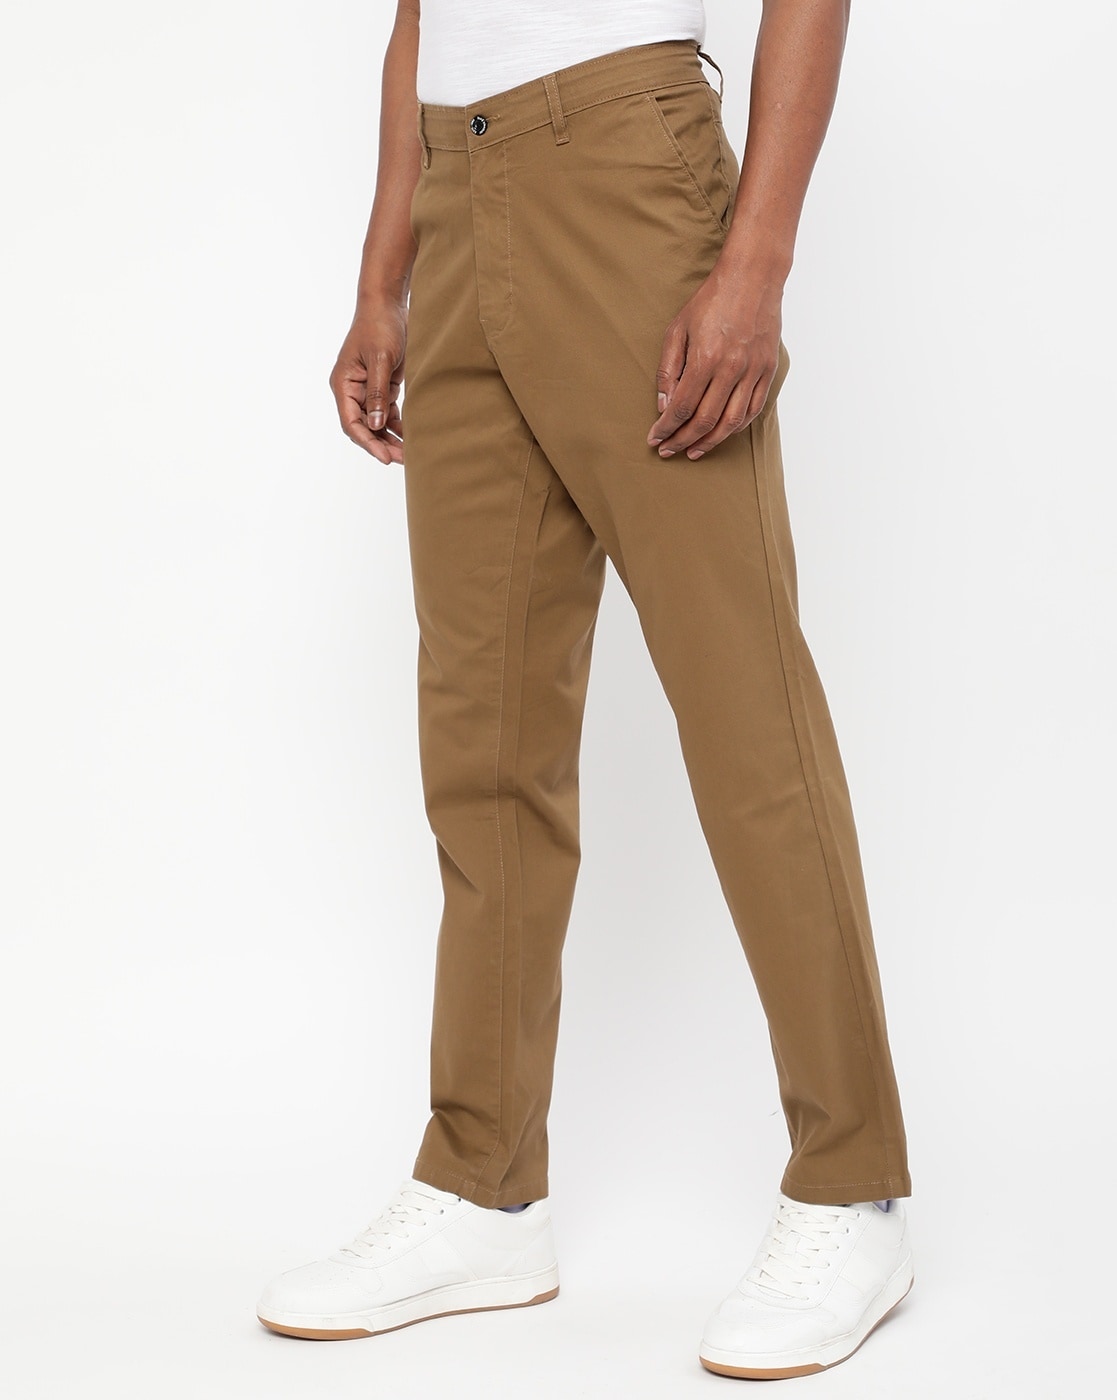 Buy Duke Stardust Men Slim Fit Cotton Trousers (SDT4580_Mouse_30) at  Amazon.in